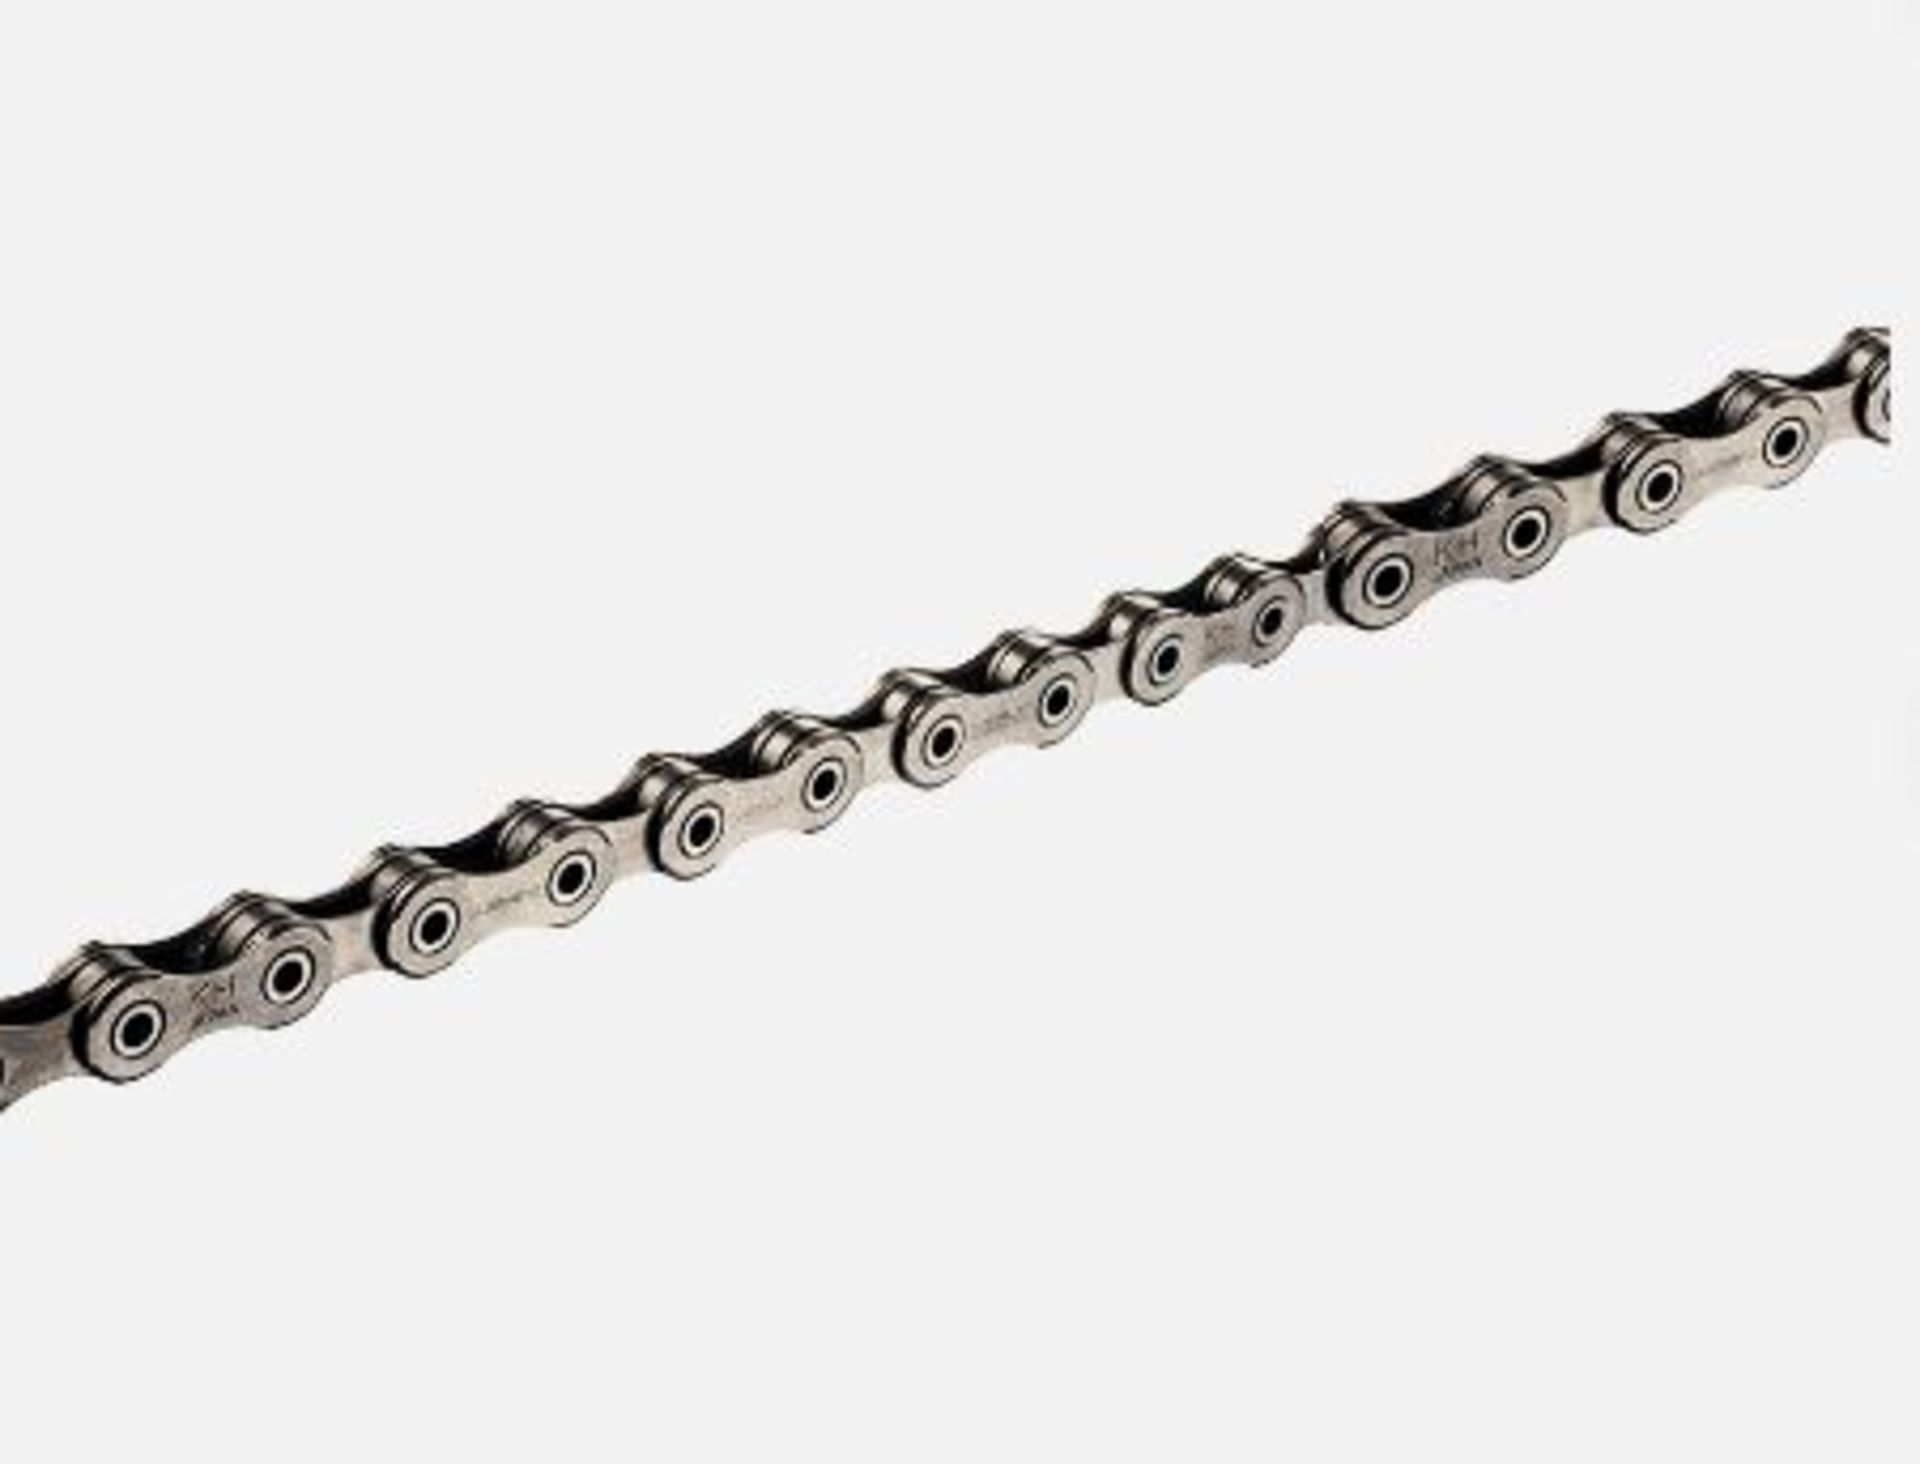 4 x Shimano CN-HG95 Deore XT 10-Speed Mountain Bicycle Chains,116 Links - Image 2 of 4